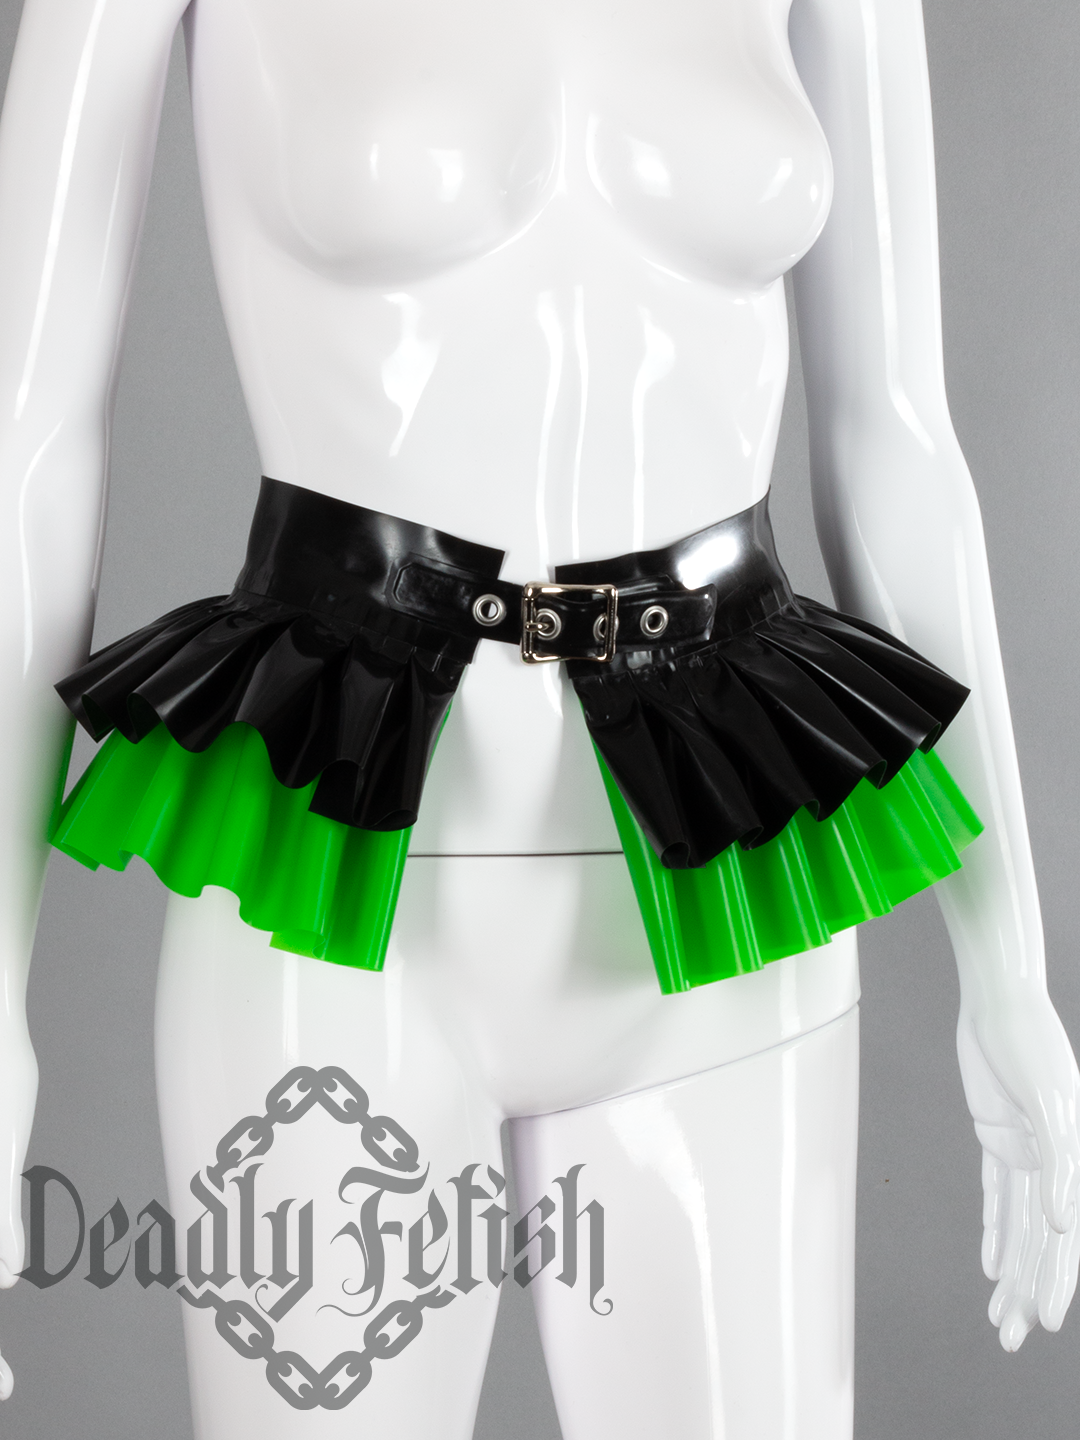 Deadly Fetish Made-To-Order Latex: Skirt #08